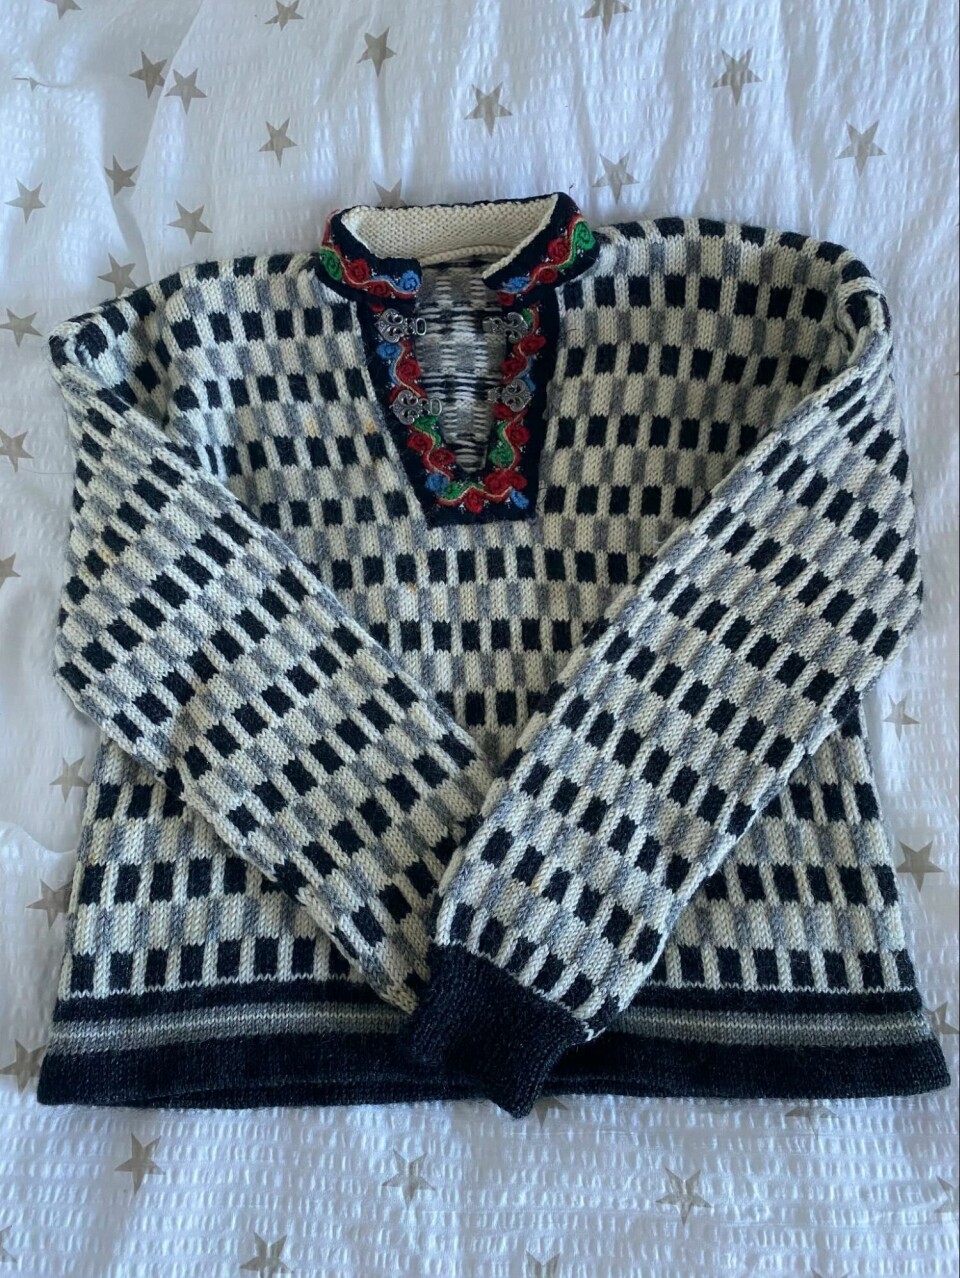 Bought myself a traditional Norwegian jumper for 149 NOK from the Majorstuen.